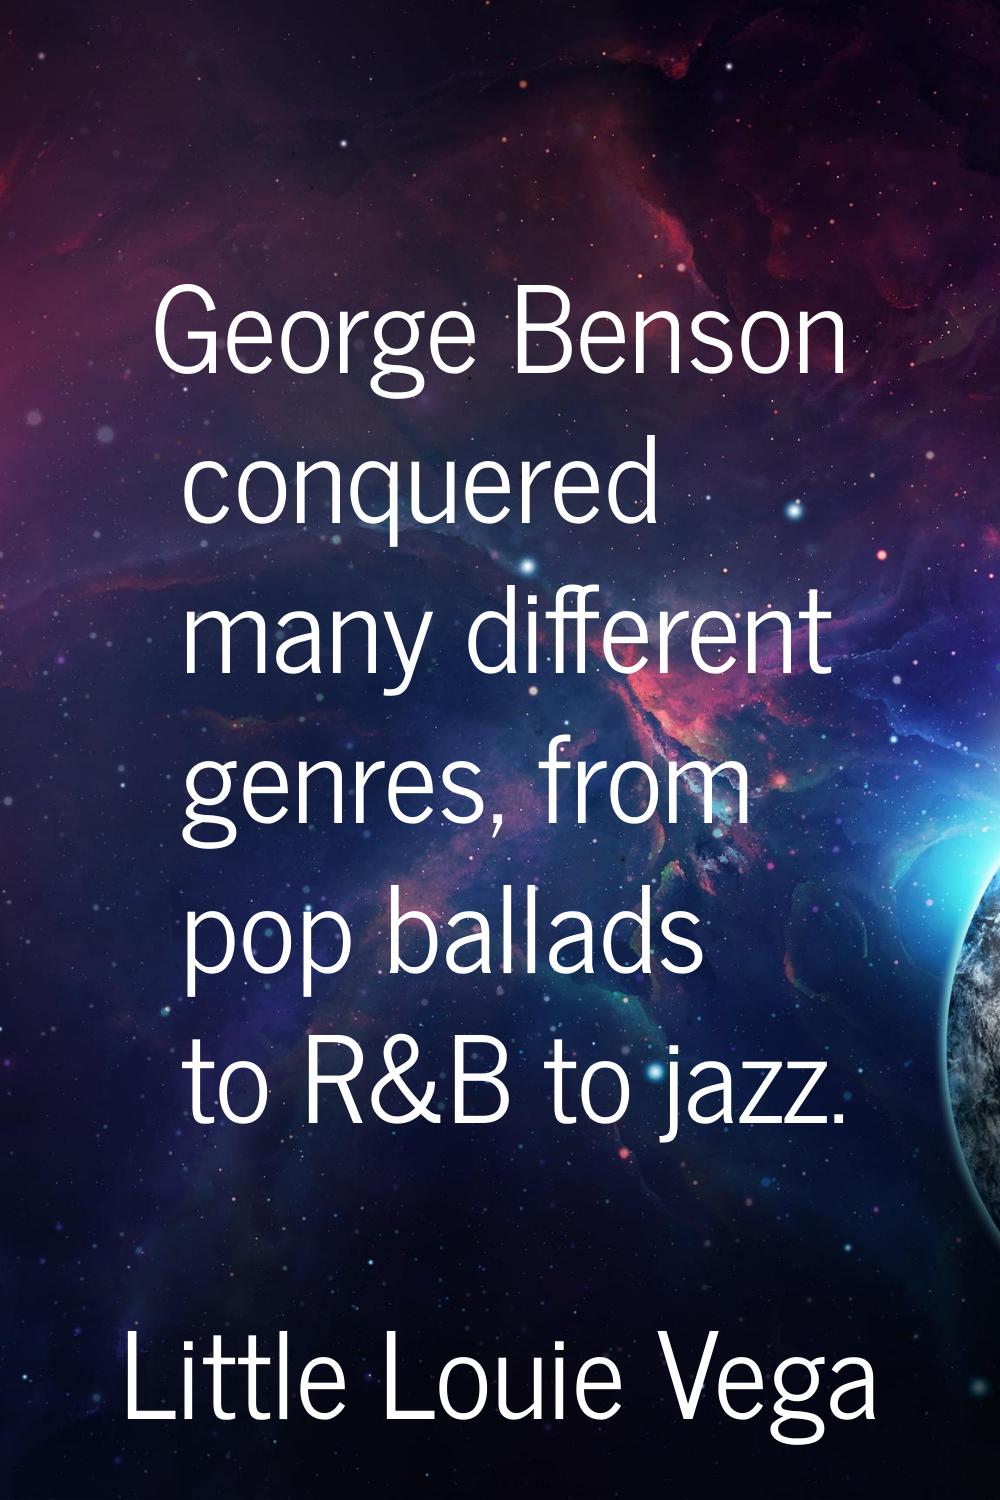 George Benson conquered many different genres, from pop ballads to R&B to jazz.